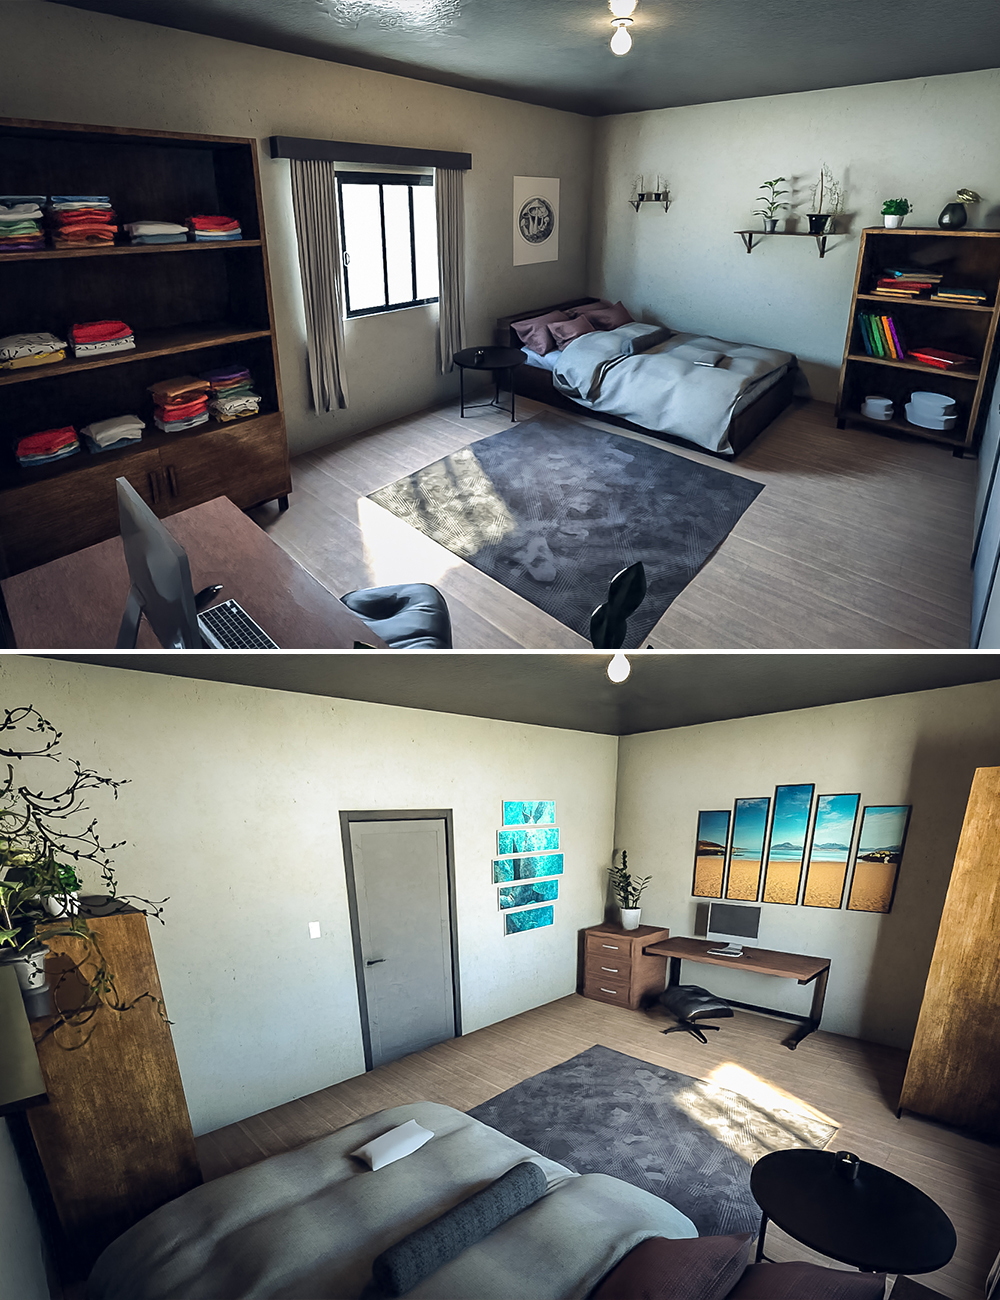 Student Bedroom by: Tesla3dCorp, 3D Models by Daz 3D